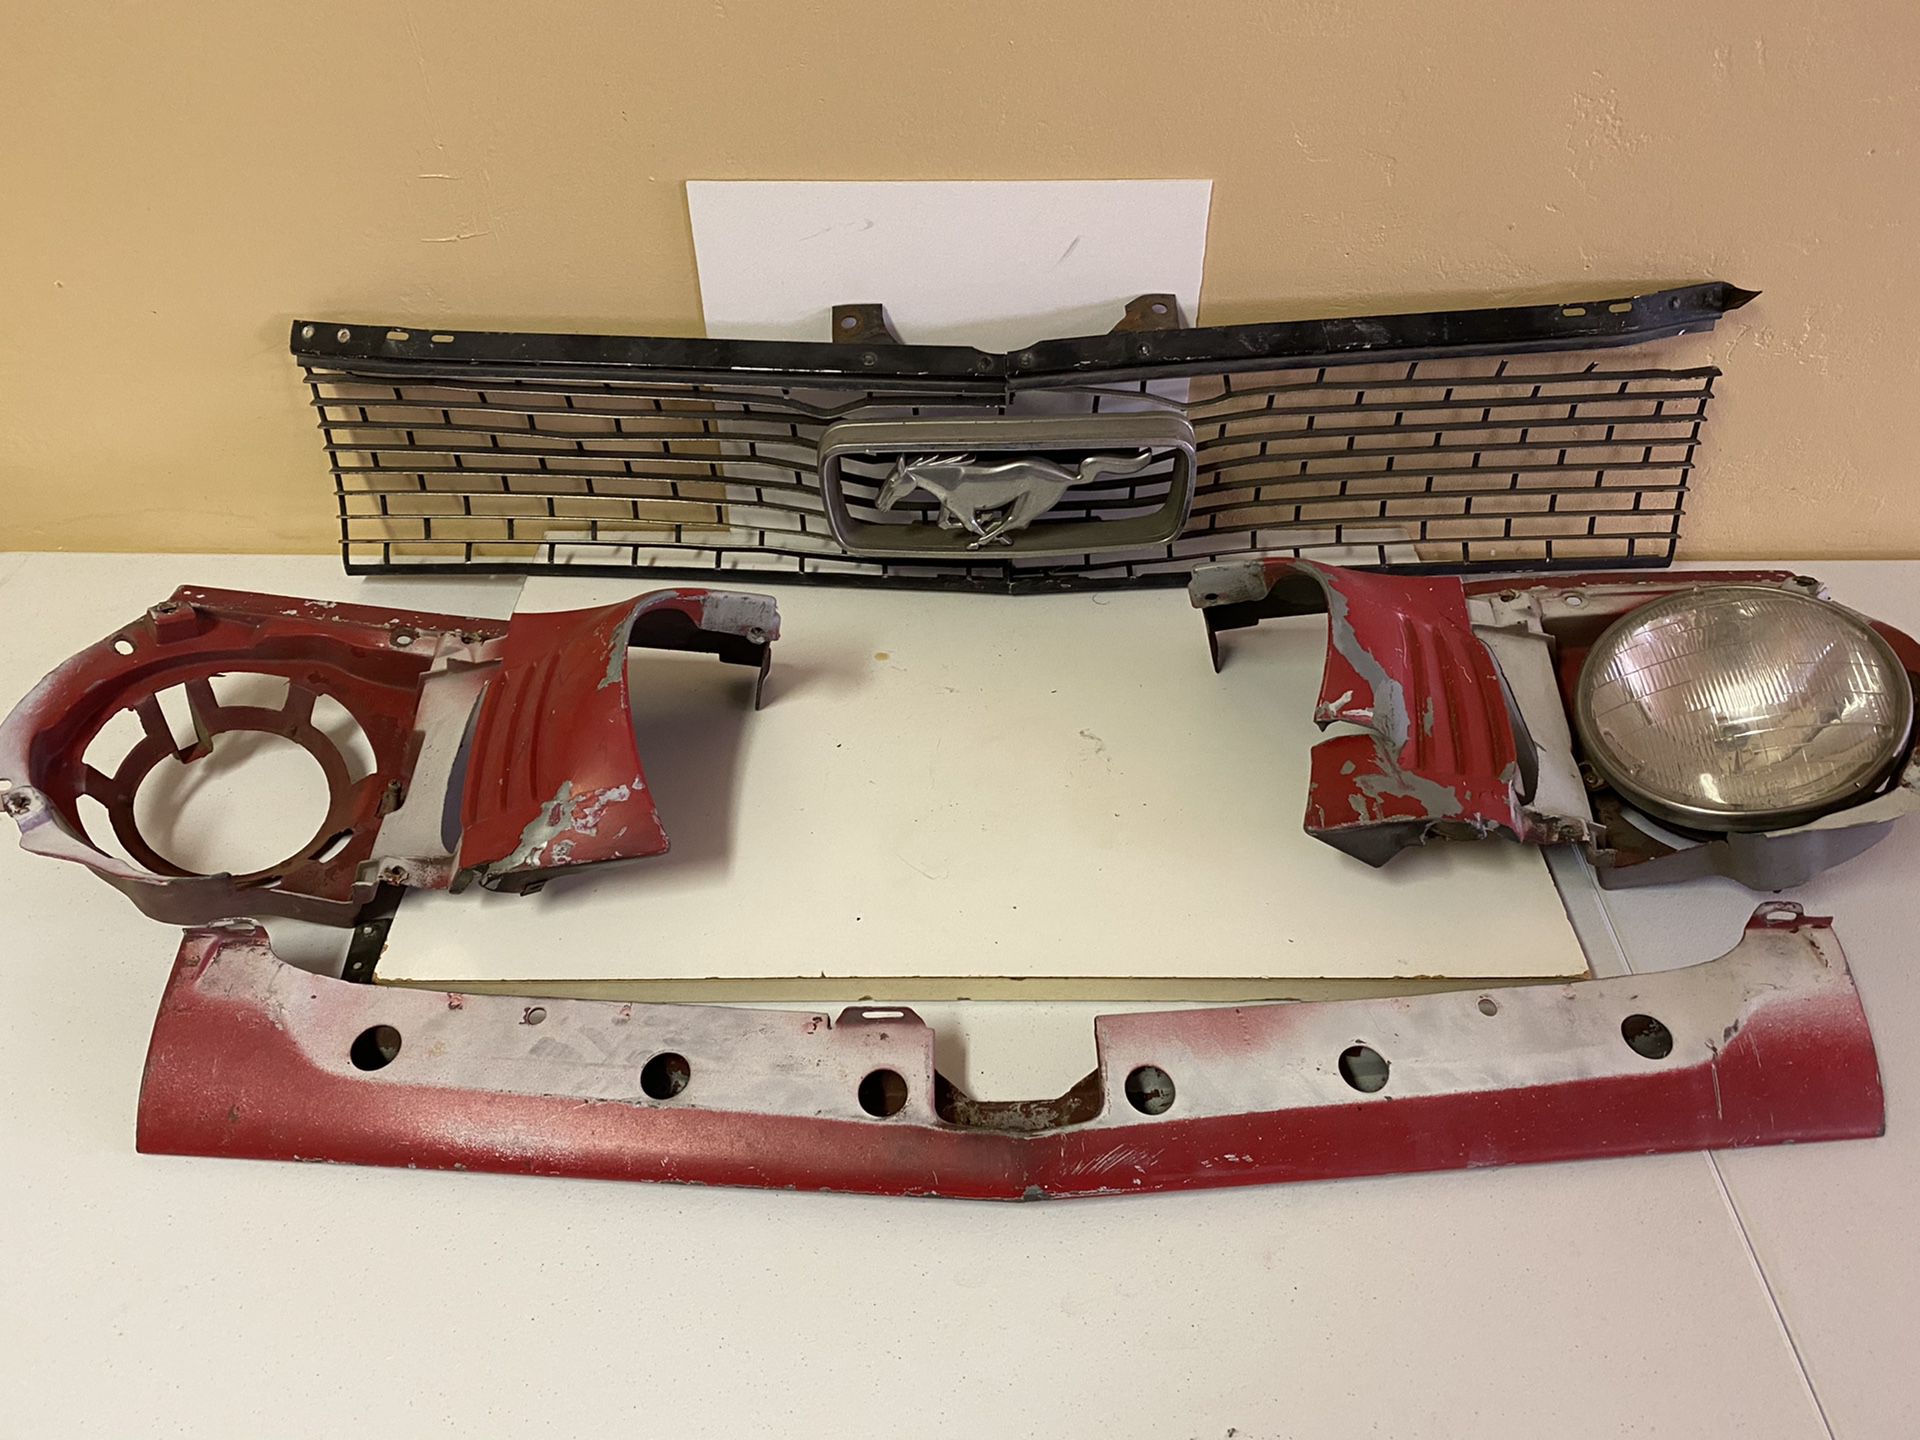 1966 Mustang front parts Grille light brackets etc and back black seat that fits 65-67 coupe